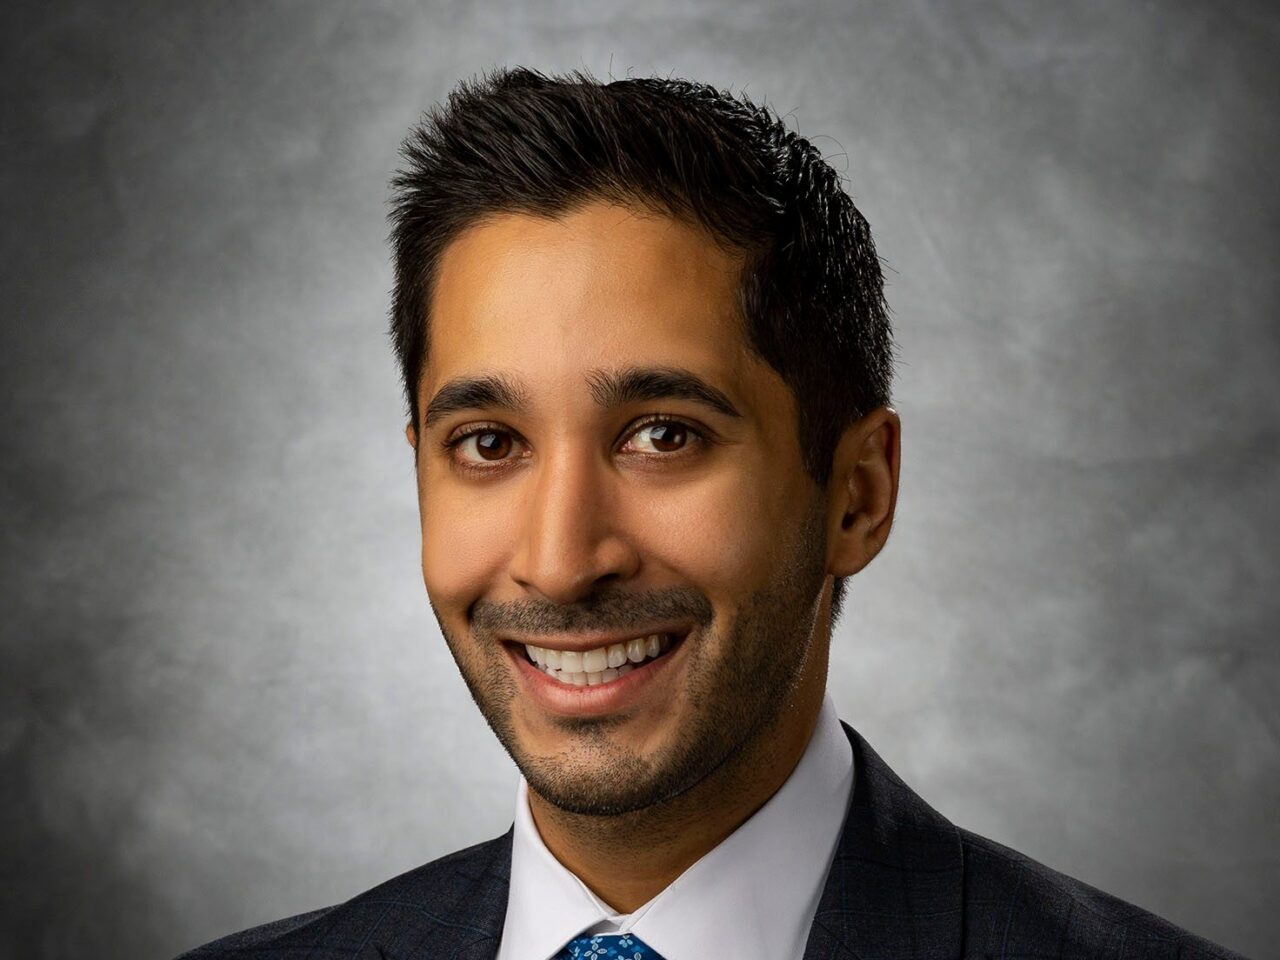 Eric K. Singhi: Proud to work with LUNGevity Foundation and team to develop a discussion guide for biomarker testing for patients with solid tumors